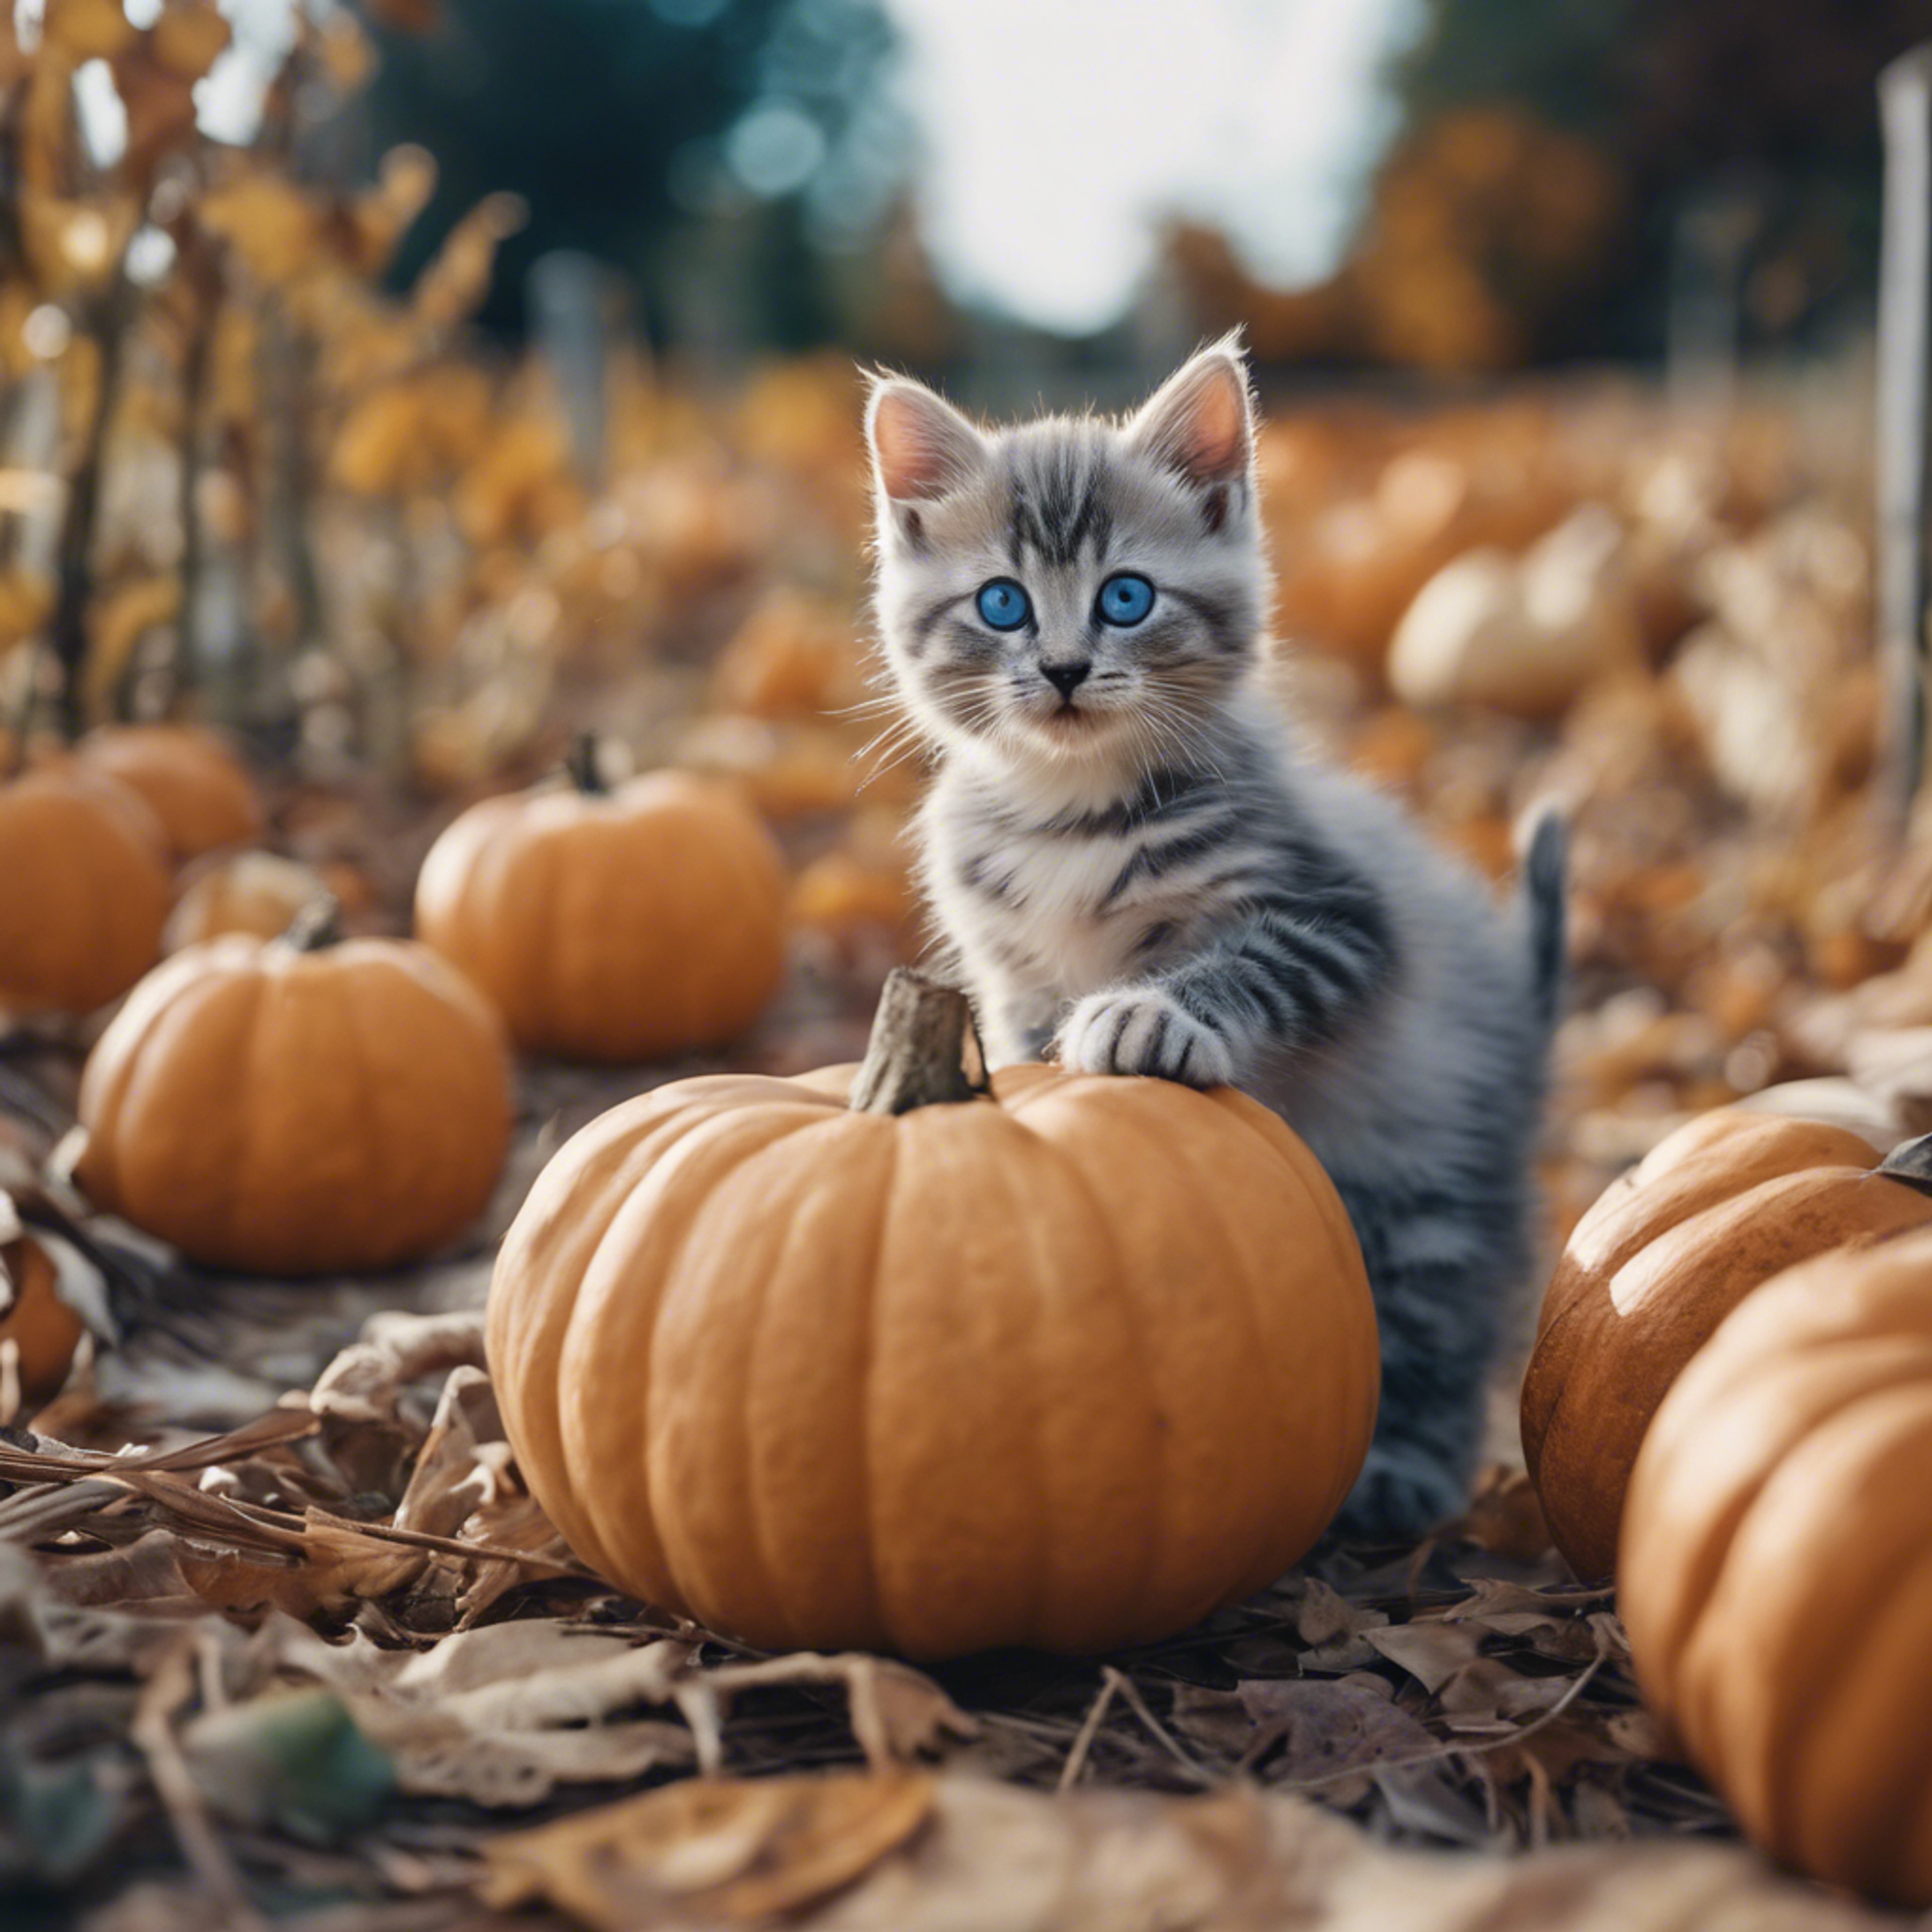 A small blue-eyed Cheetoh kitten exploring a pumpkin patch on an invitingly cool fall day. 牆紙[ee8fc80847a940e288a7]